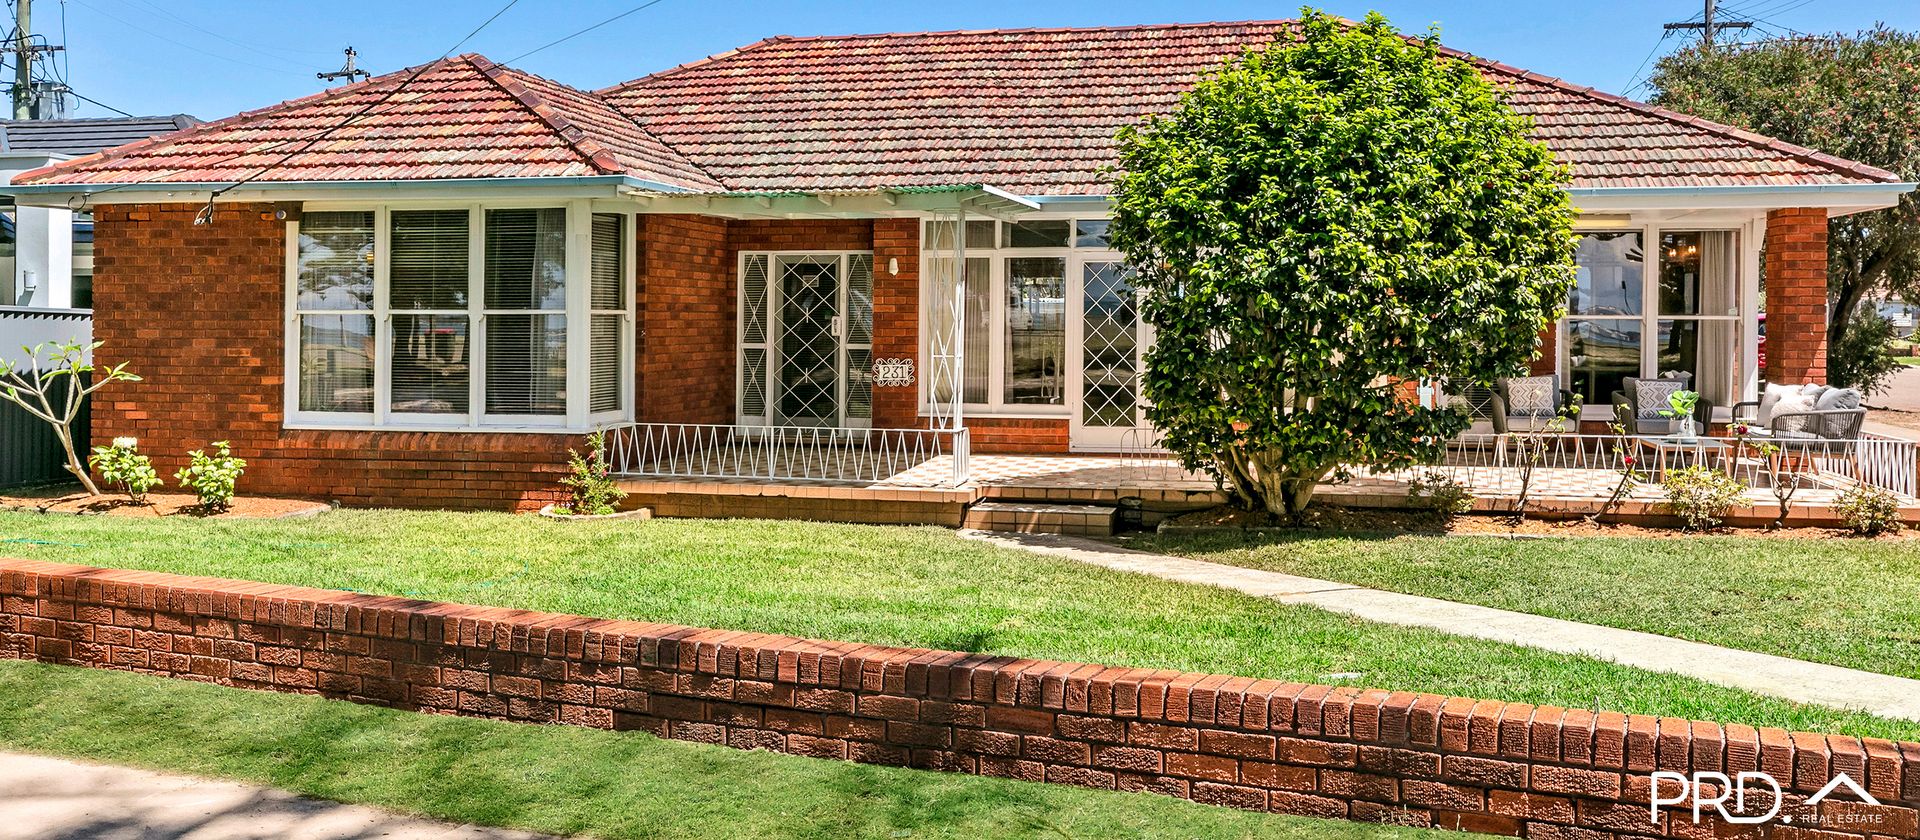 231 The Grand Parade, Monterey NSW 2217, Image 1